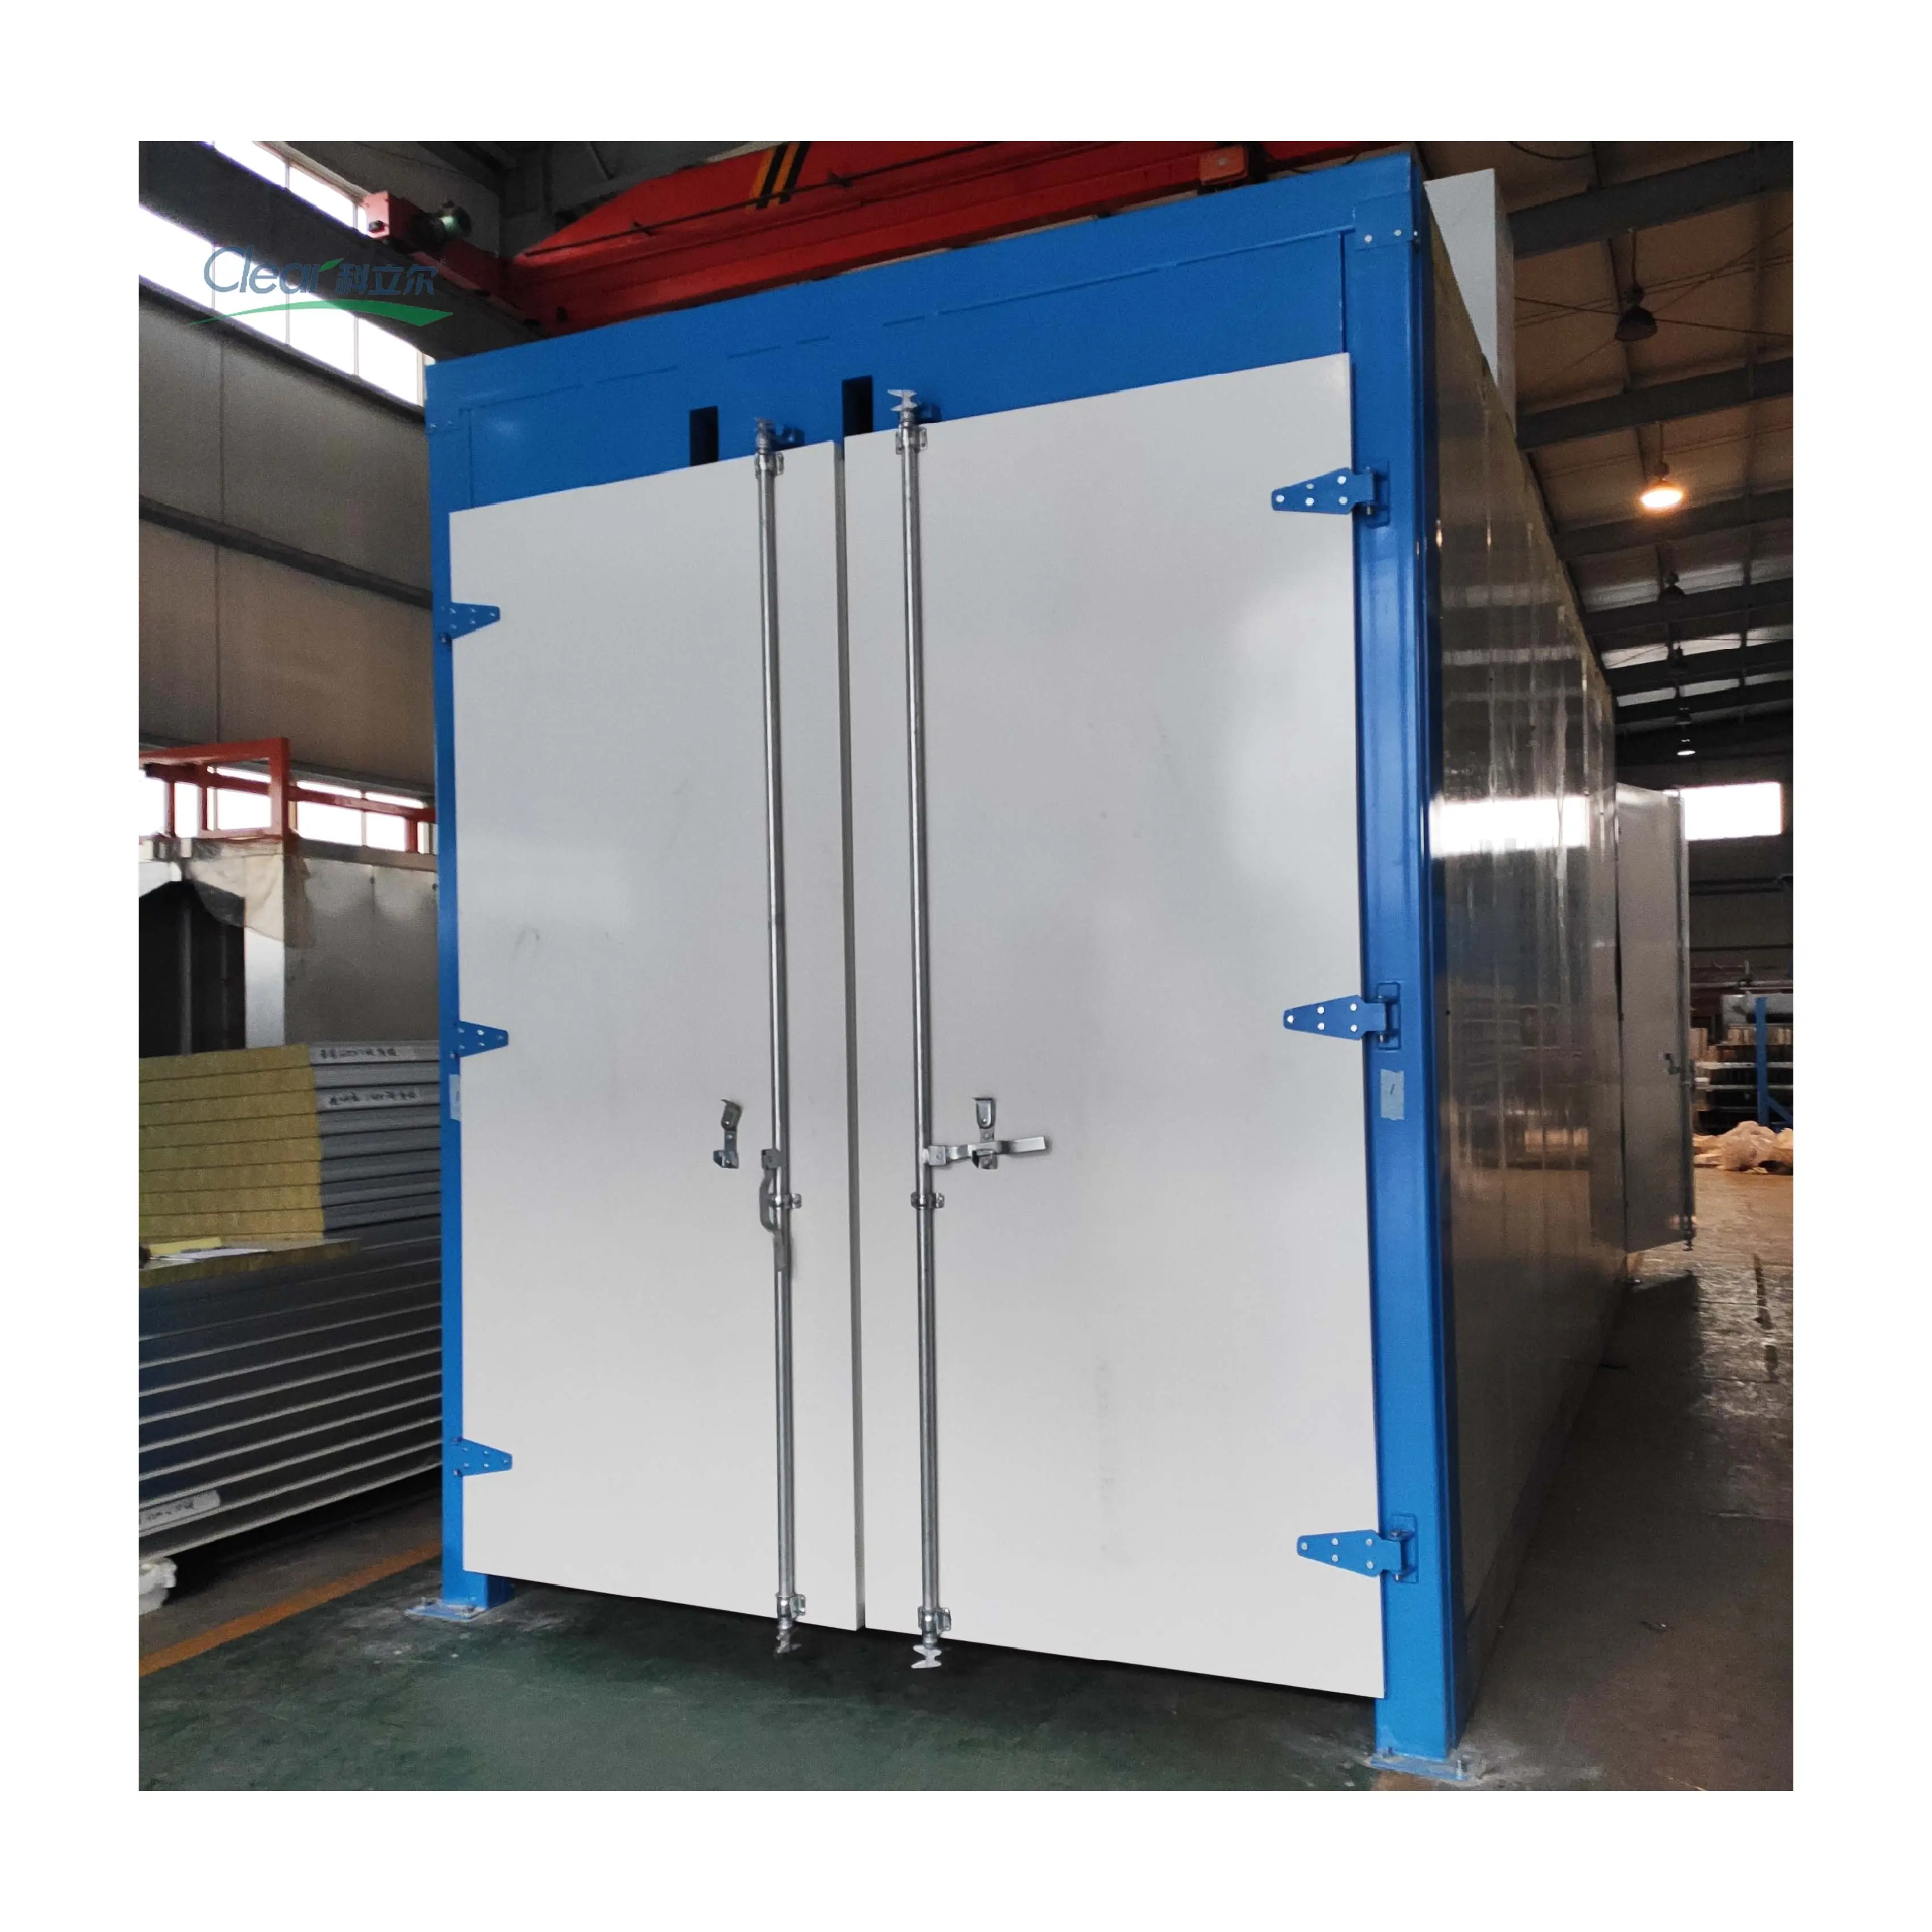 GAS industrial powder coating curing oven with racking